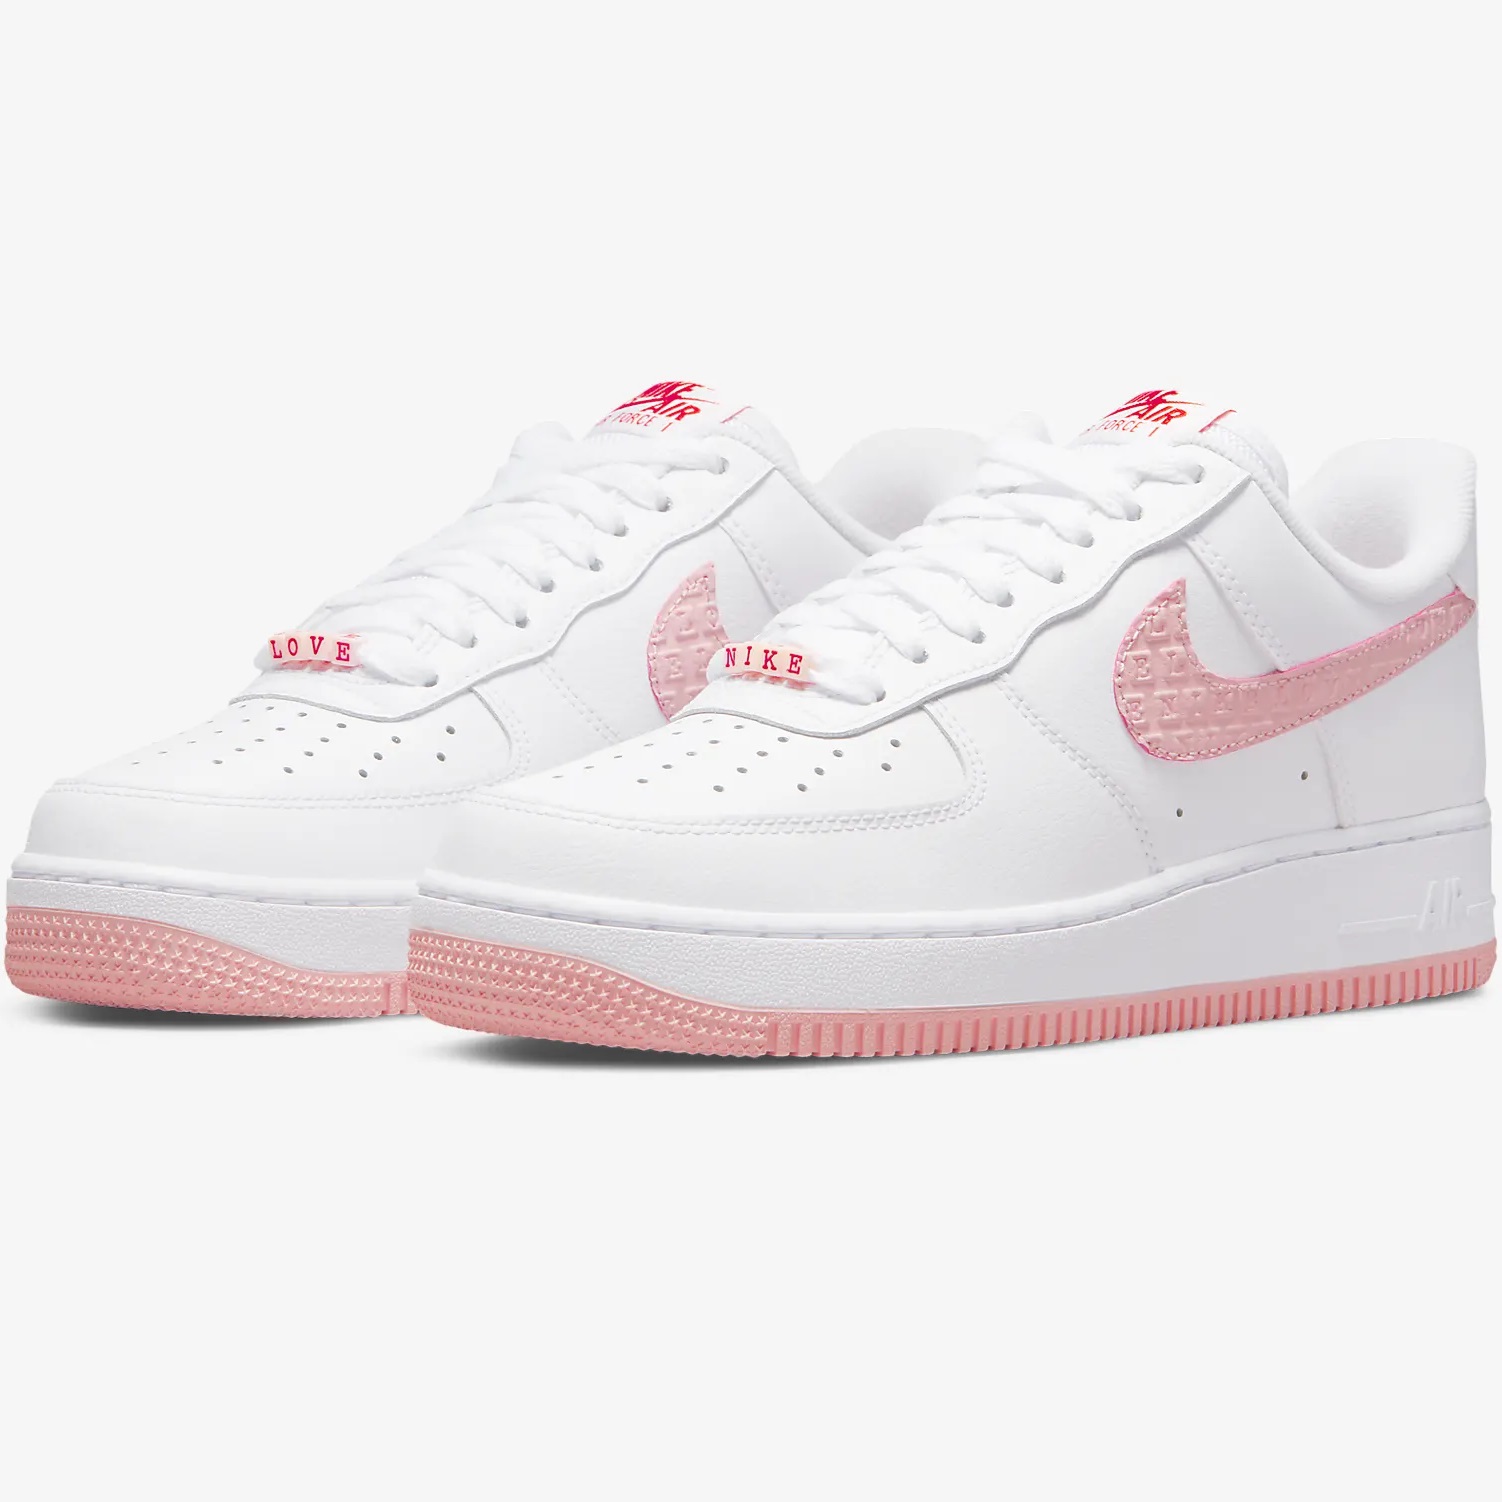 GIÀY THỂ THAO NỮ NIKE AIR FORCE 1 07 LOW VD VALENTINE´S DAY WHITE ATMOSPHERE UNIVERSITY RED SAIL DQ9320-100 4